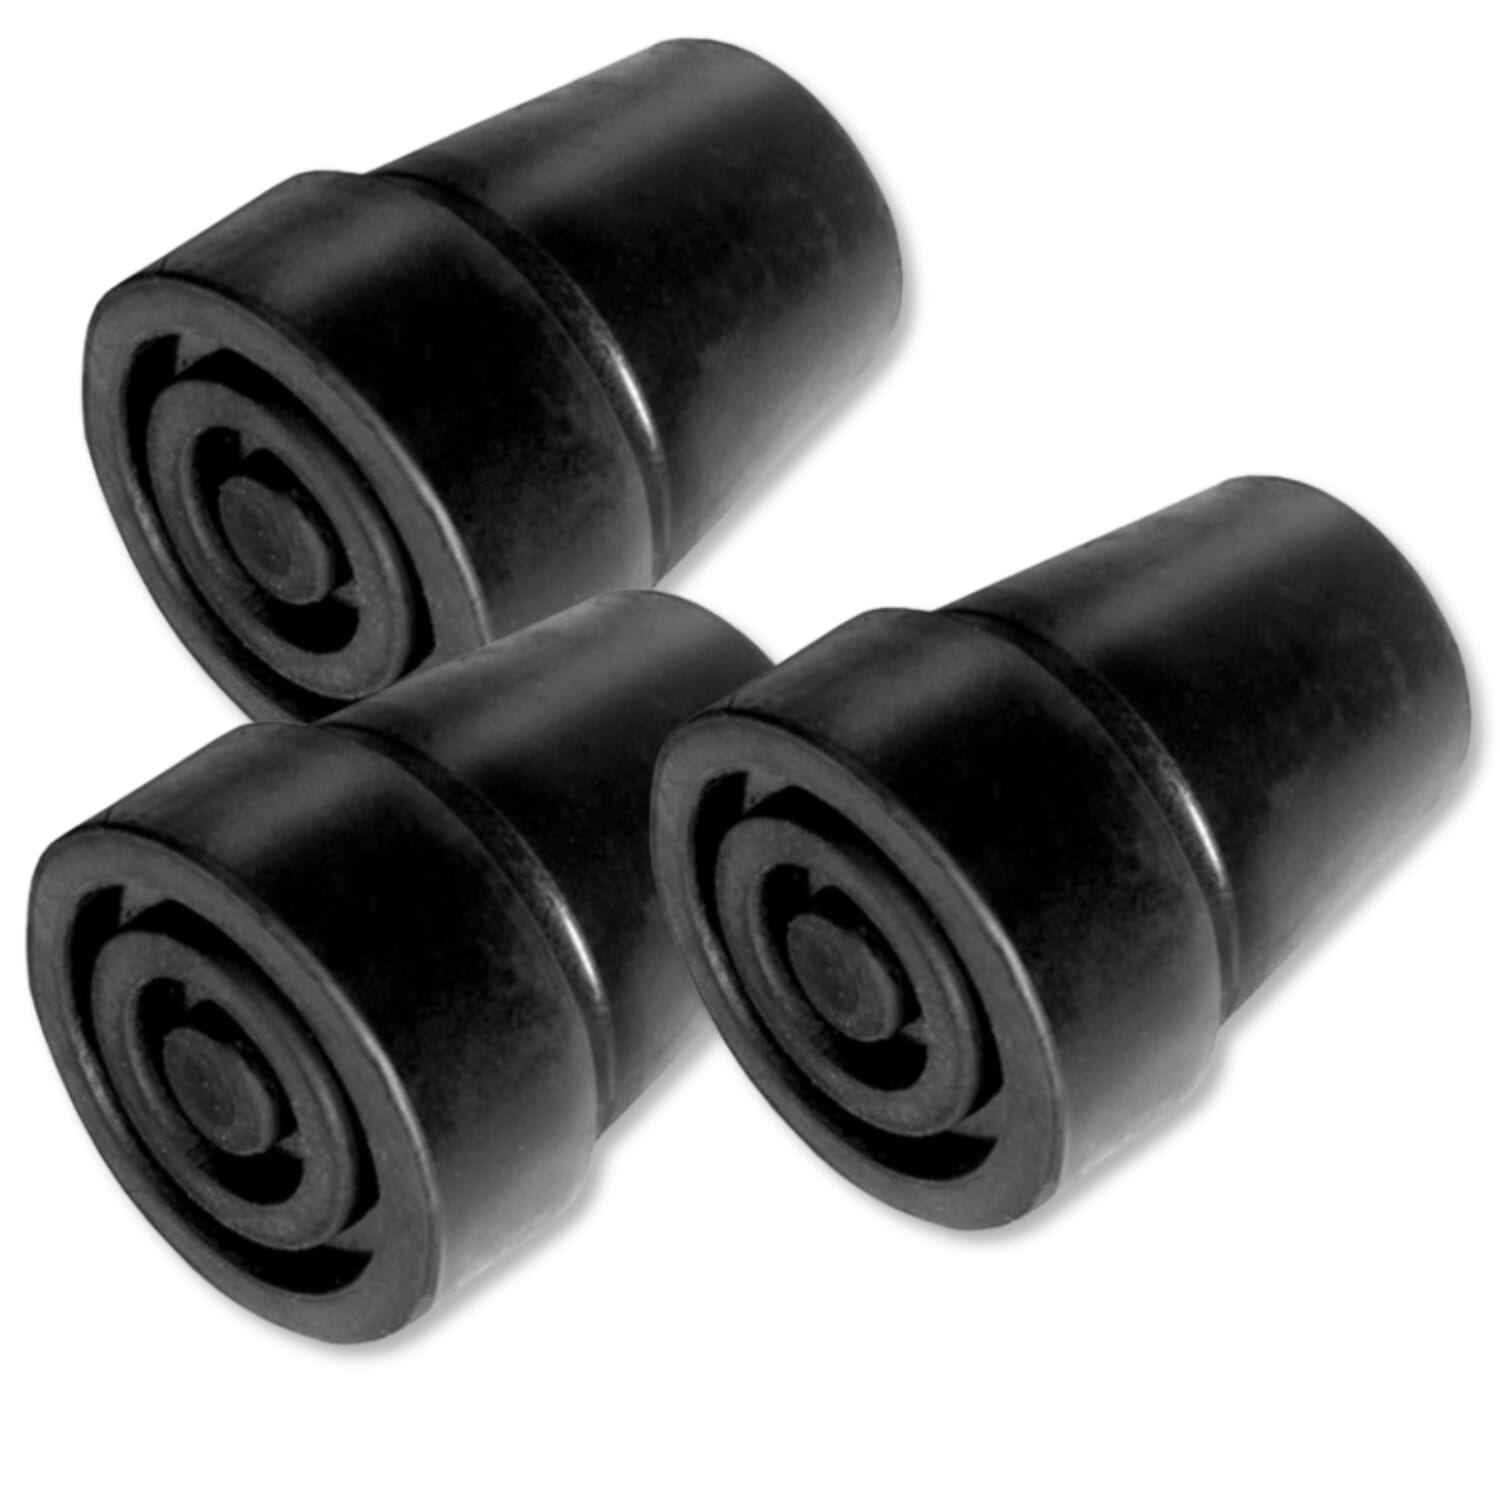 View Rubber Ends For Walking Sticks Rubber Ferrules 19mm black pack of 3 information